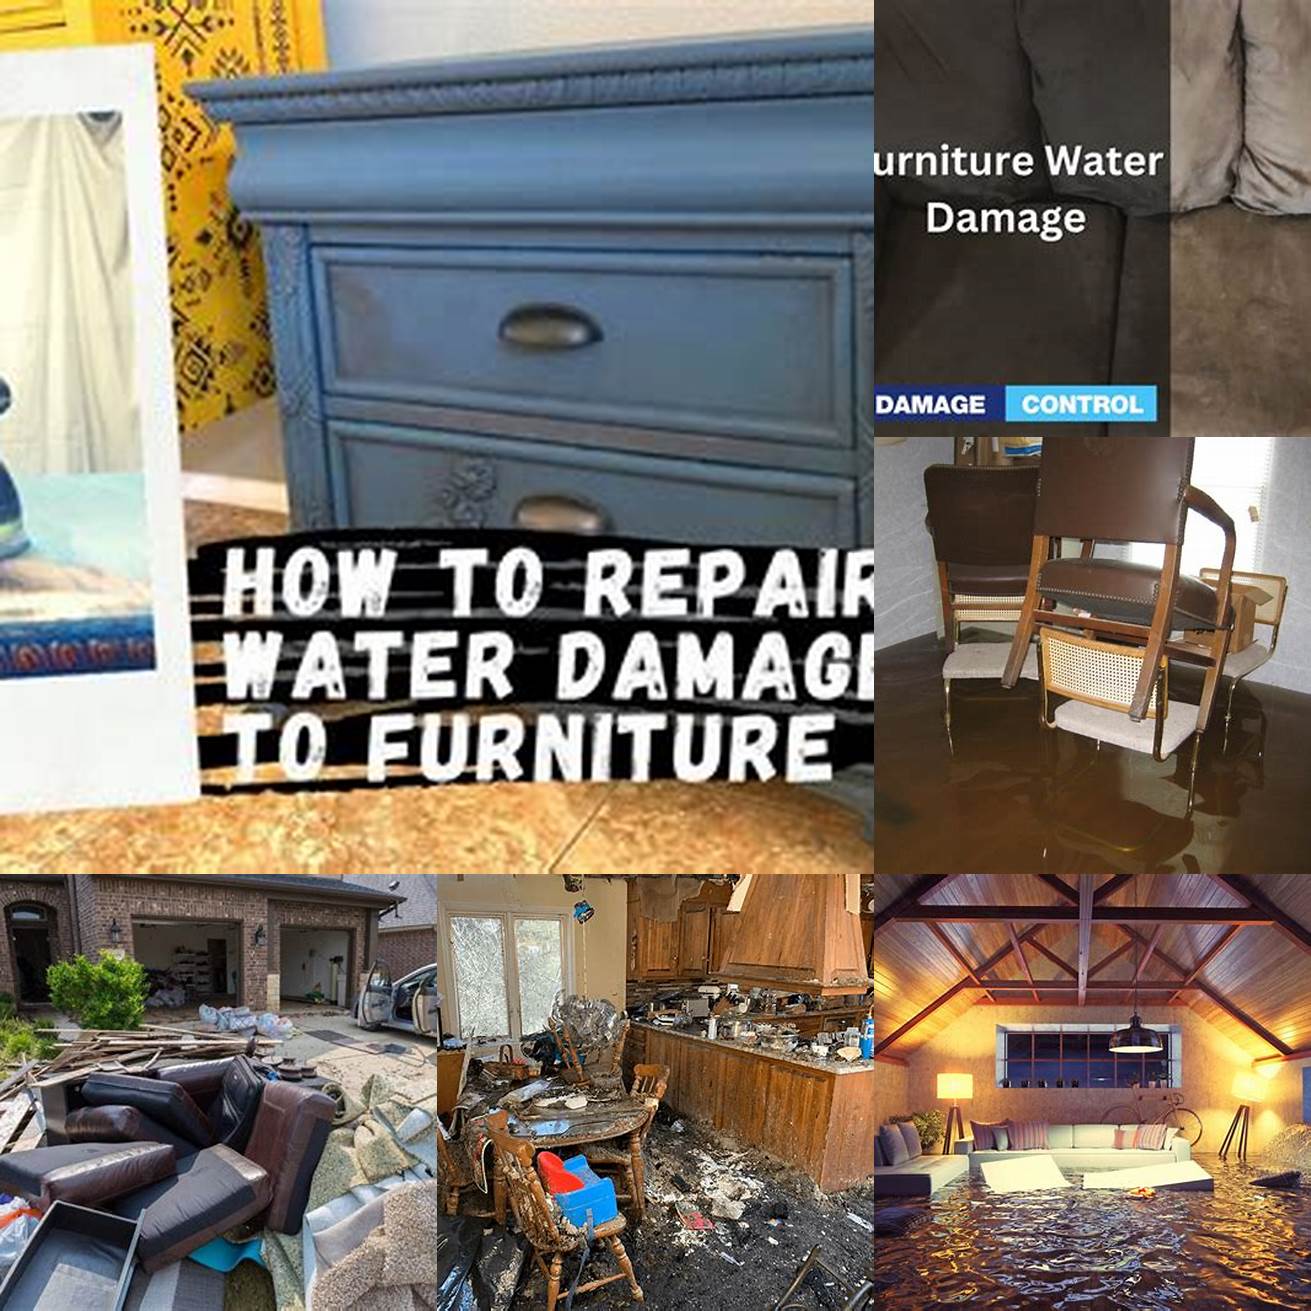 Check for Signs of Water Damage